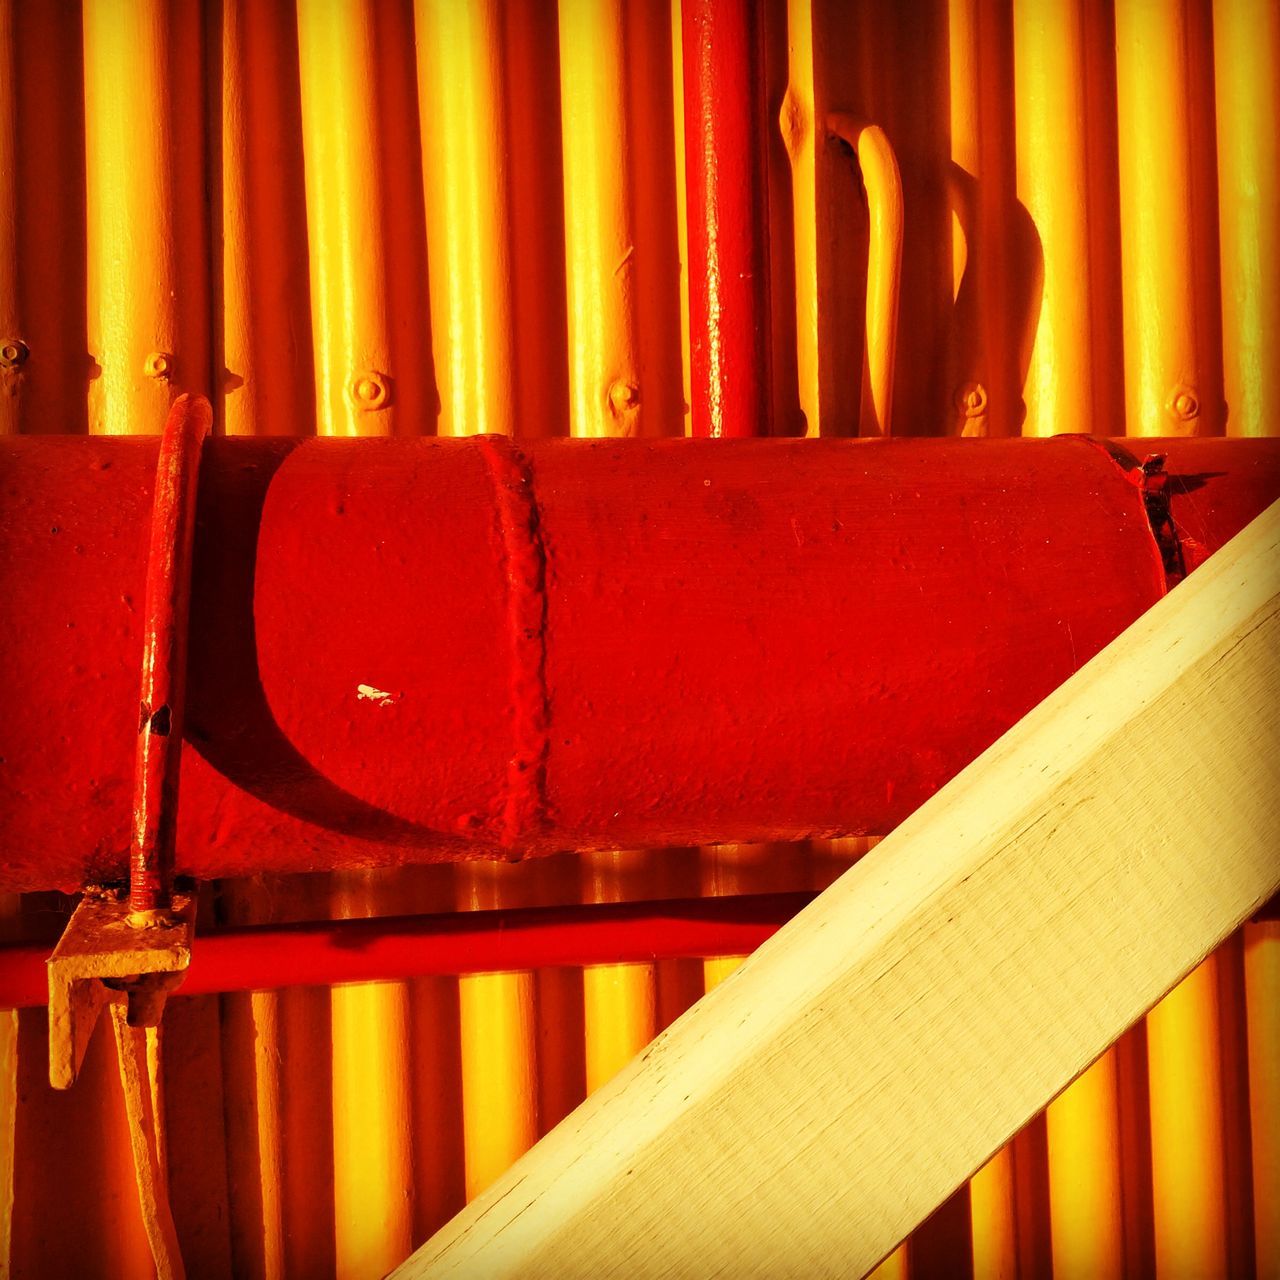 indoors, red, in a row, multi colored, side by side, yellow, order, close-up, still life, variation, no people, arrangement, choice, large group of objects, shelf, wood - material, orange color, metal, abundance, hanging